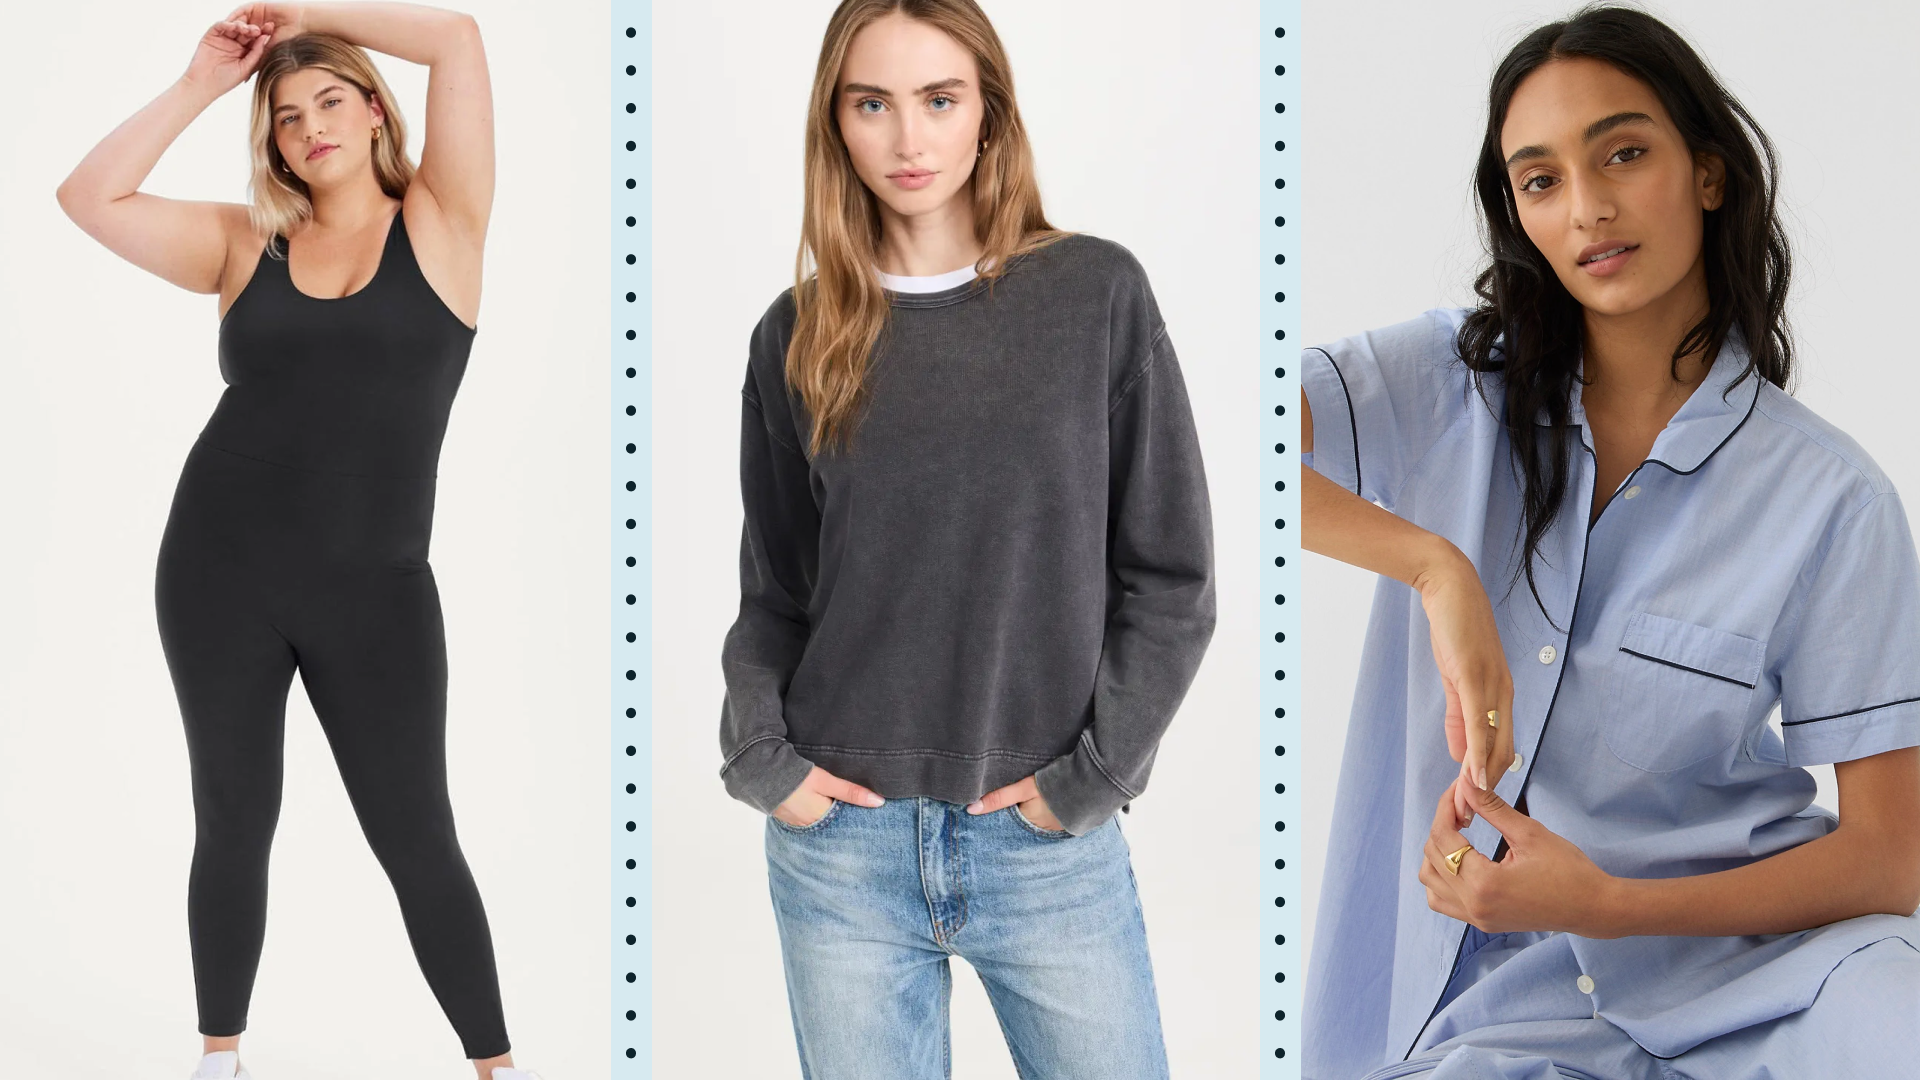 This $50 loungewear set is giving us major SKIMS vibes